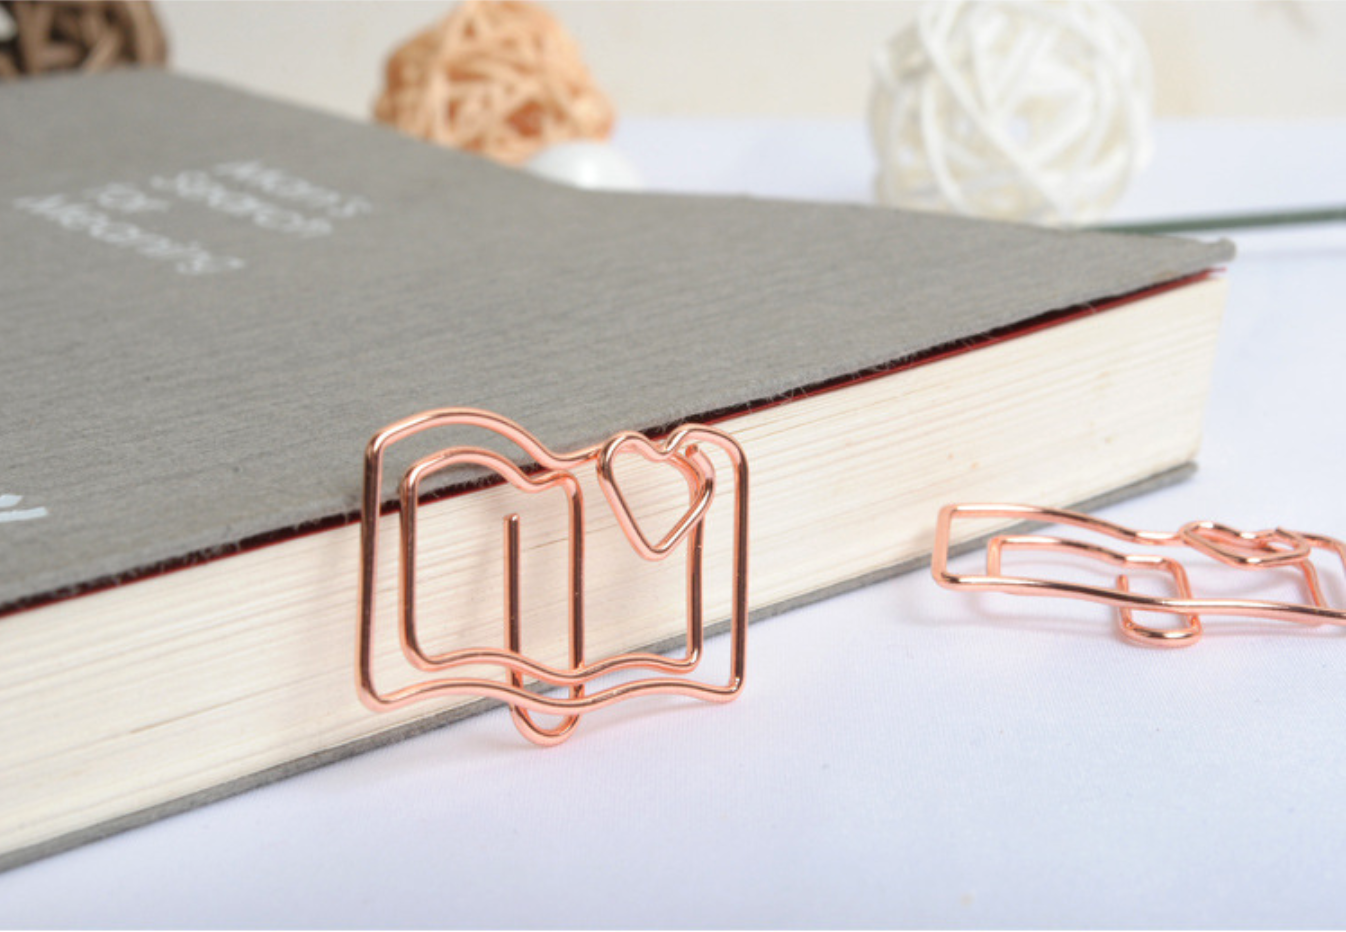 Mr. Pen- Cross Paper Clips, 35 Pack (Gold and Rose Gold Color), Bible Paper Clips, Journaling Paper Clips, Bible Study Supplies, Christian